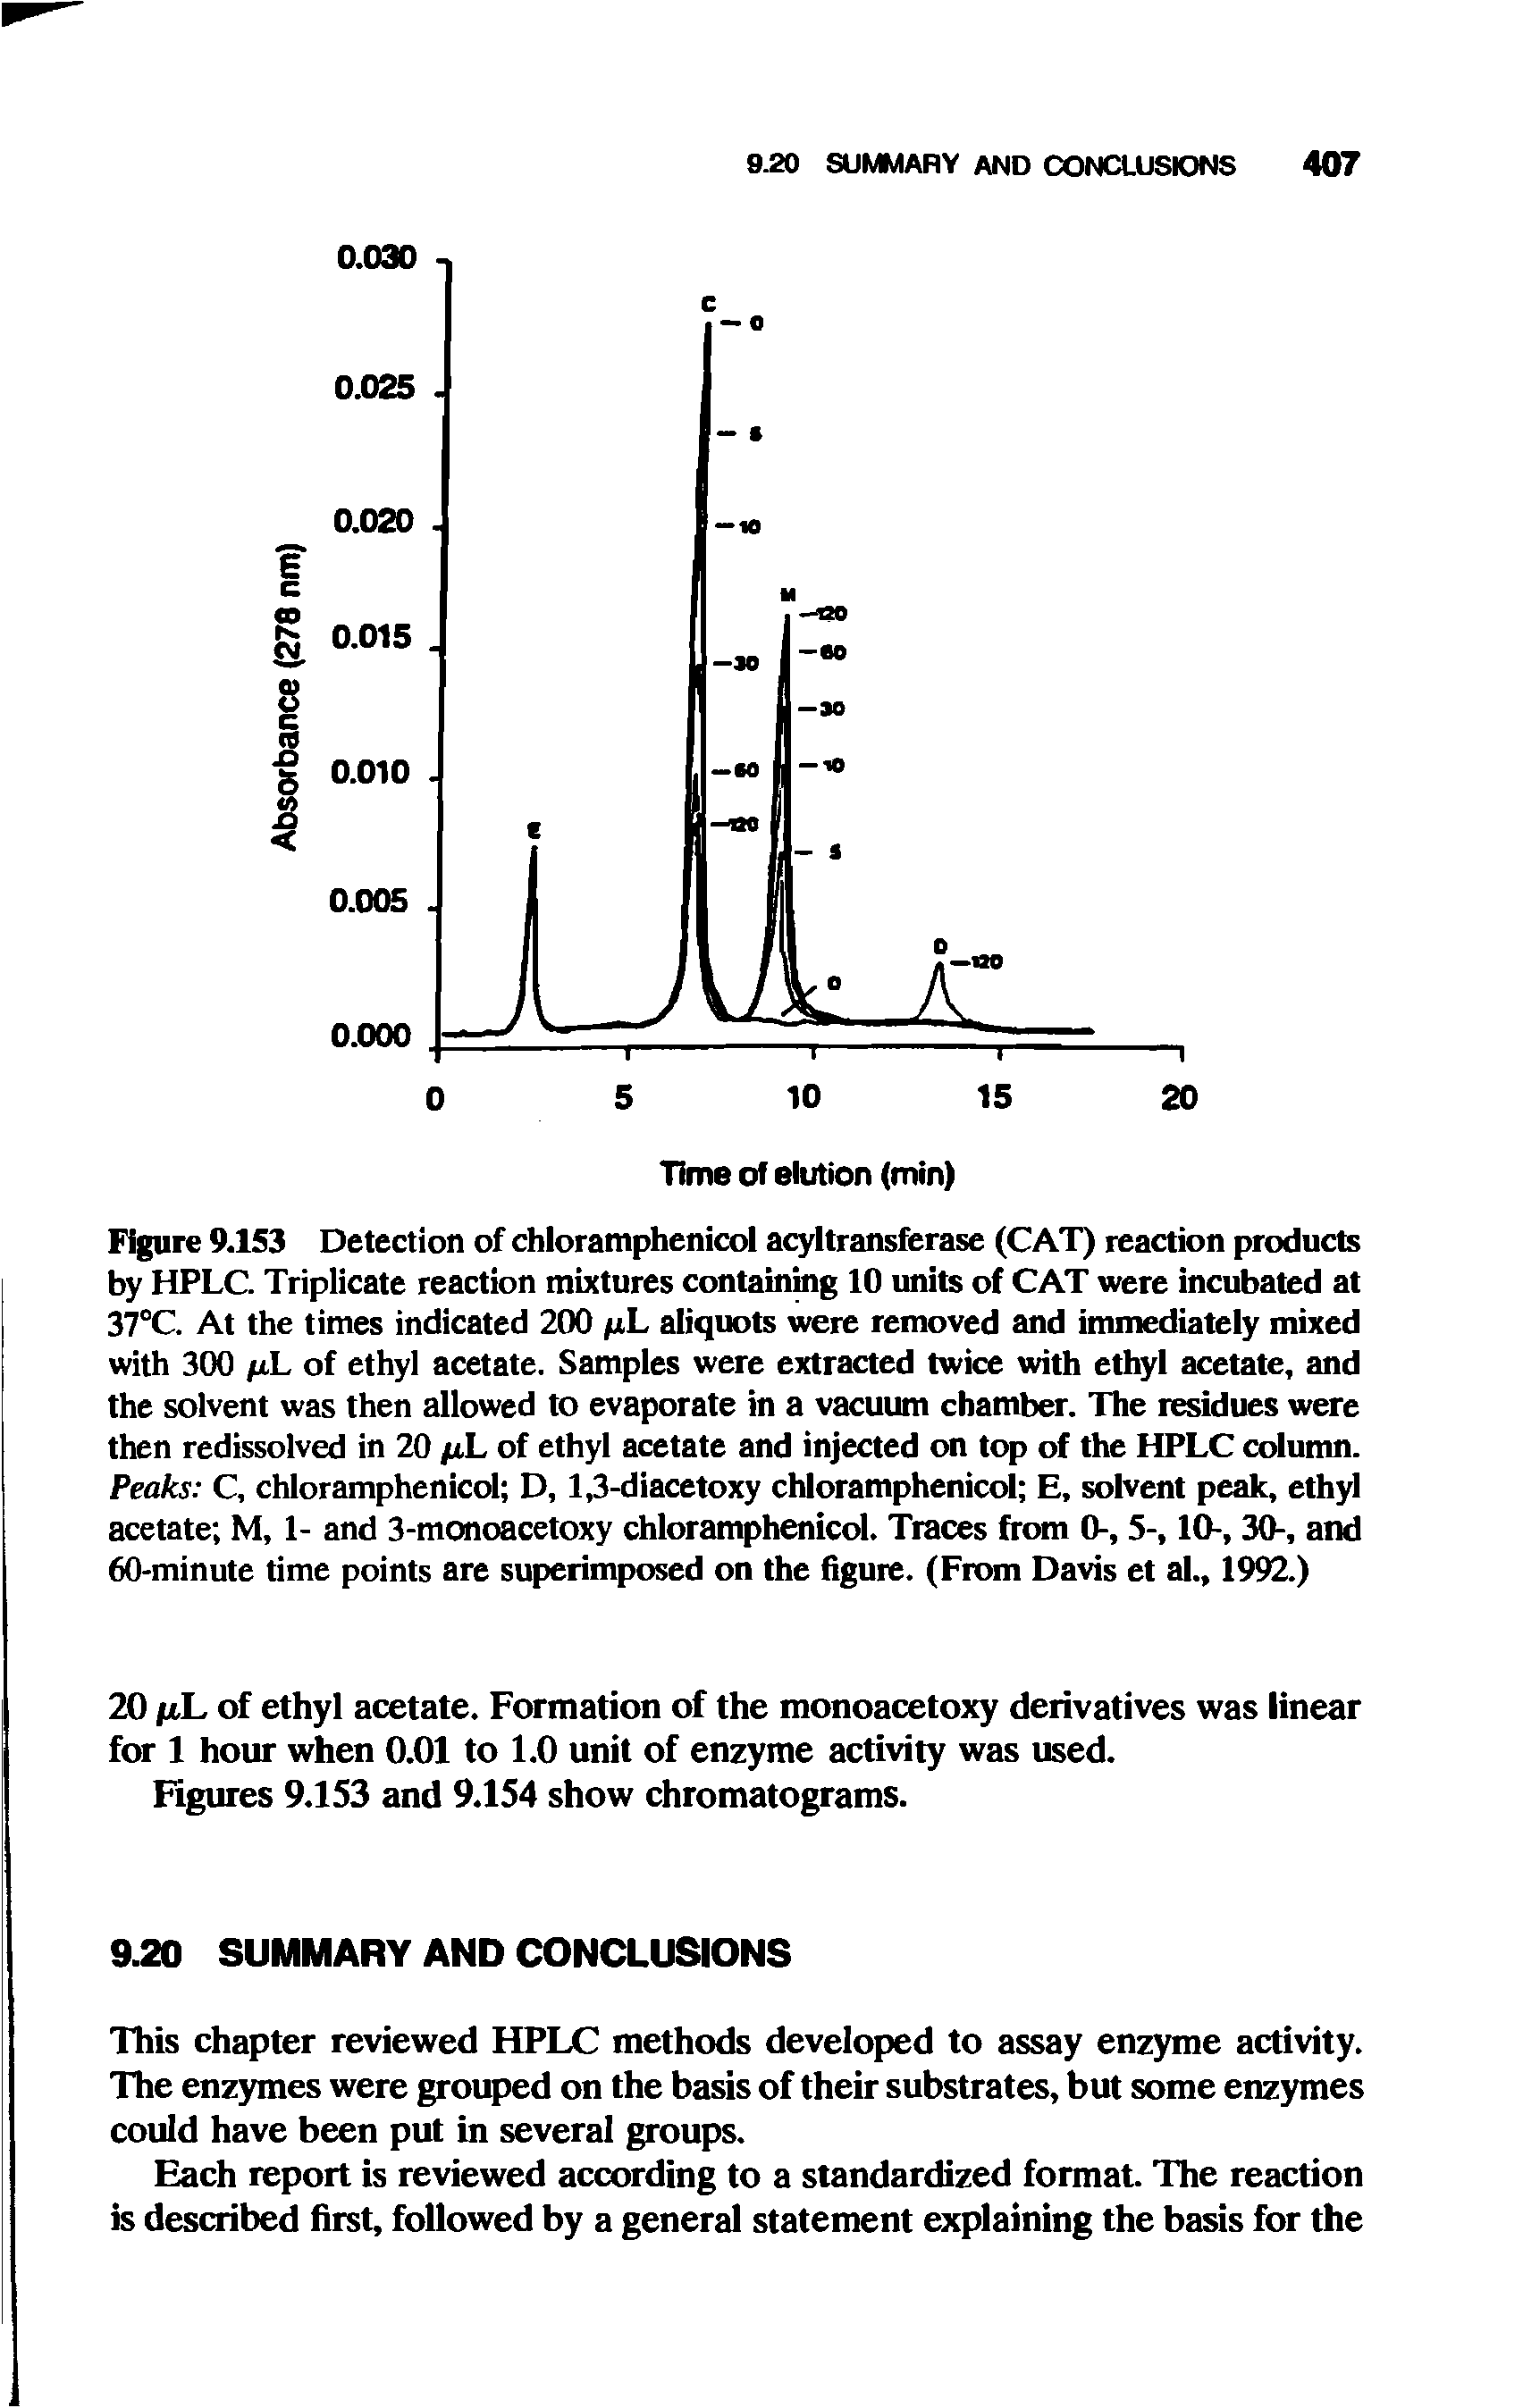 Figure 9.153 Detection of chloramphenicol acyltransferase (CAT) reaction products by HPLC. Triplicate reaction mixtures containing 10 units of CAT were incubated at 37°C. At the times indicated 200 /xL aliquots were removed and immediately mixed with 300 piL of ethyl acetate. Samples were extracted twice with ethyl acetate, and the solvent was then allowed to evaporate in a vacuum chamber. The residues were then redissolved in 20 /nL of ethyl acetate and injected on top of the HPLC column. Peaks C, chloramphenicol D, 1,3-diacetoxy chloramphenicol E, solvent peak, ethyl acetate M, 1- and 3-monoacetoxy chloramphenicol. Traces from 0-, 5-, 10-, 30-, and 60-minute time points are superimposed on the figure. (From Davis et al., 1992.)...